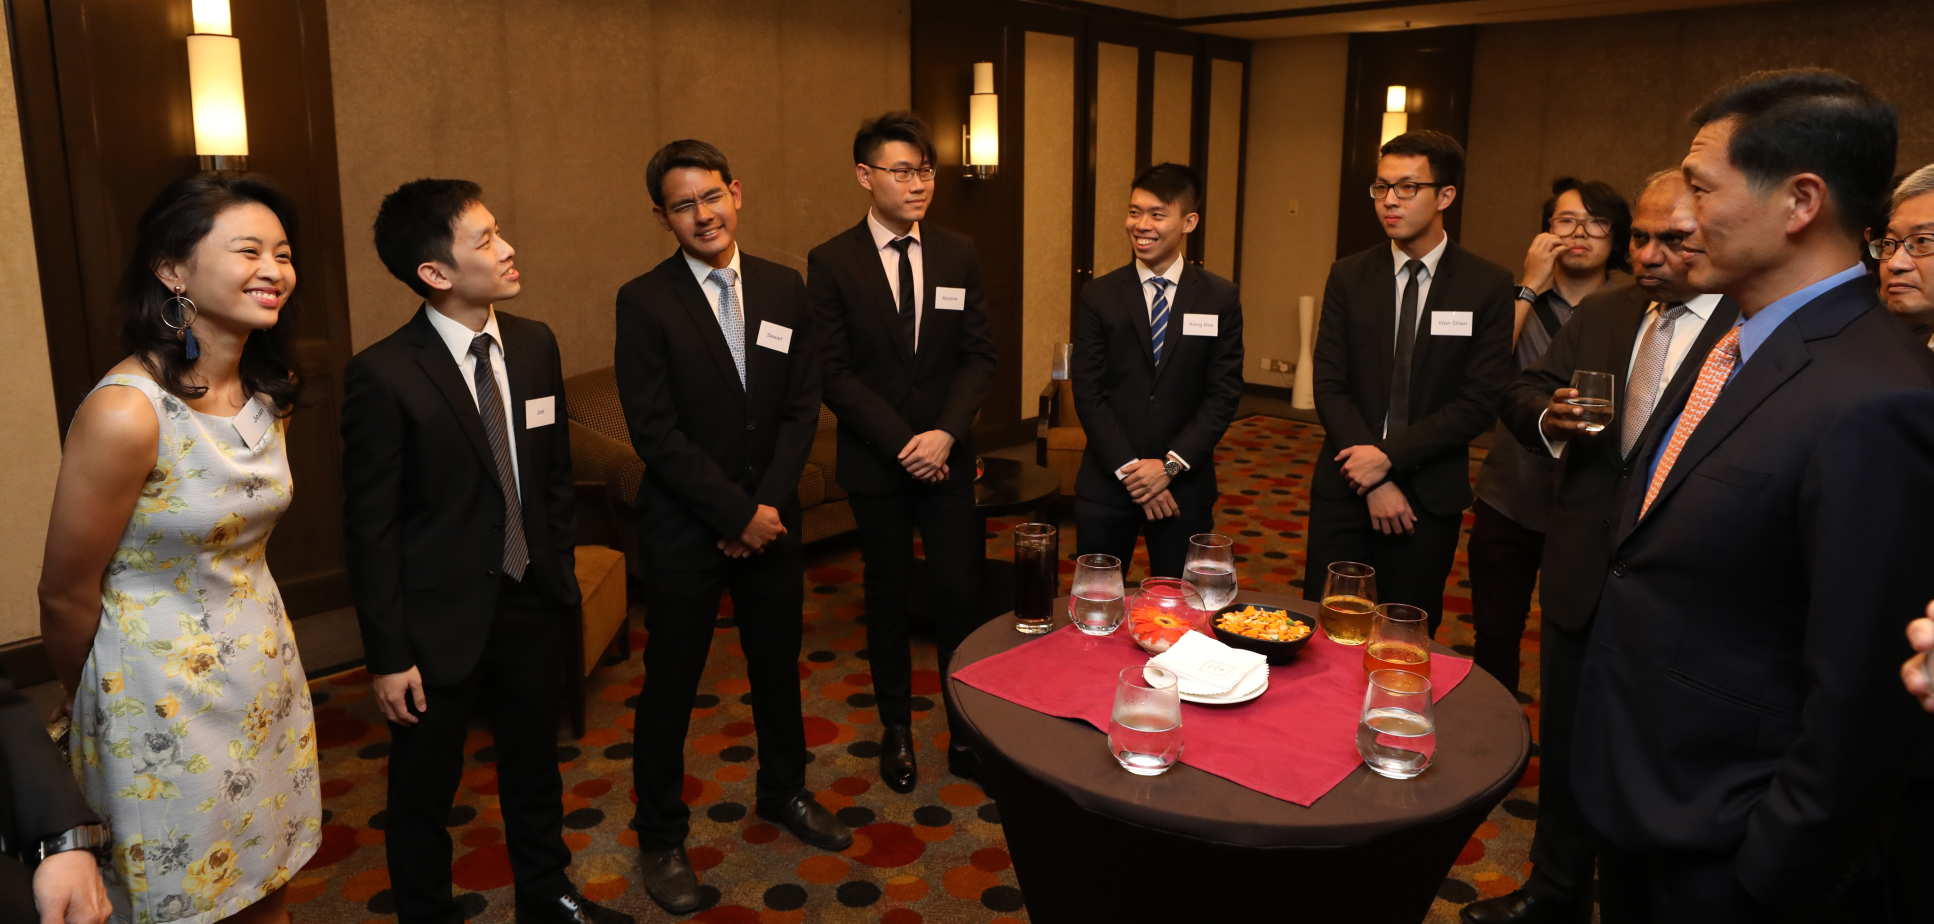 Graduands chatted with Education Minister Ong Ye Kung